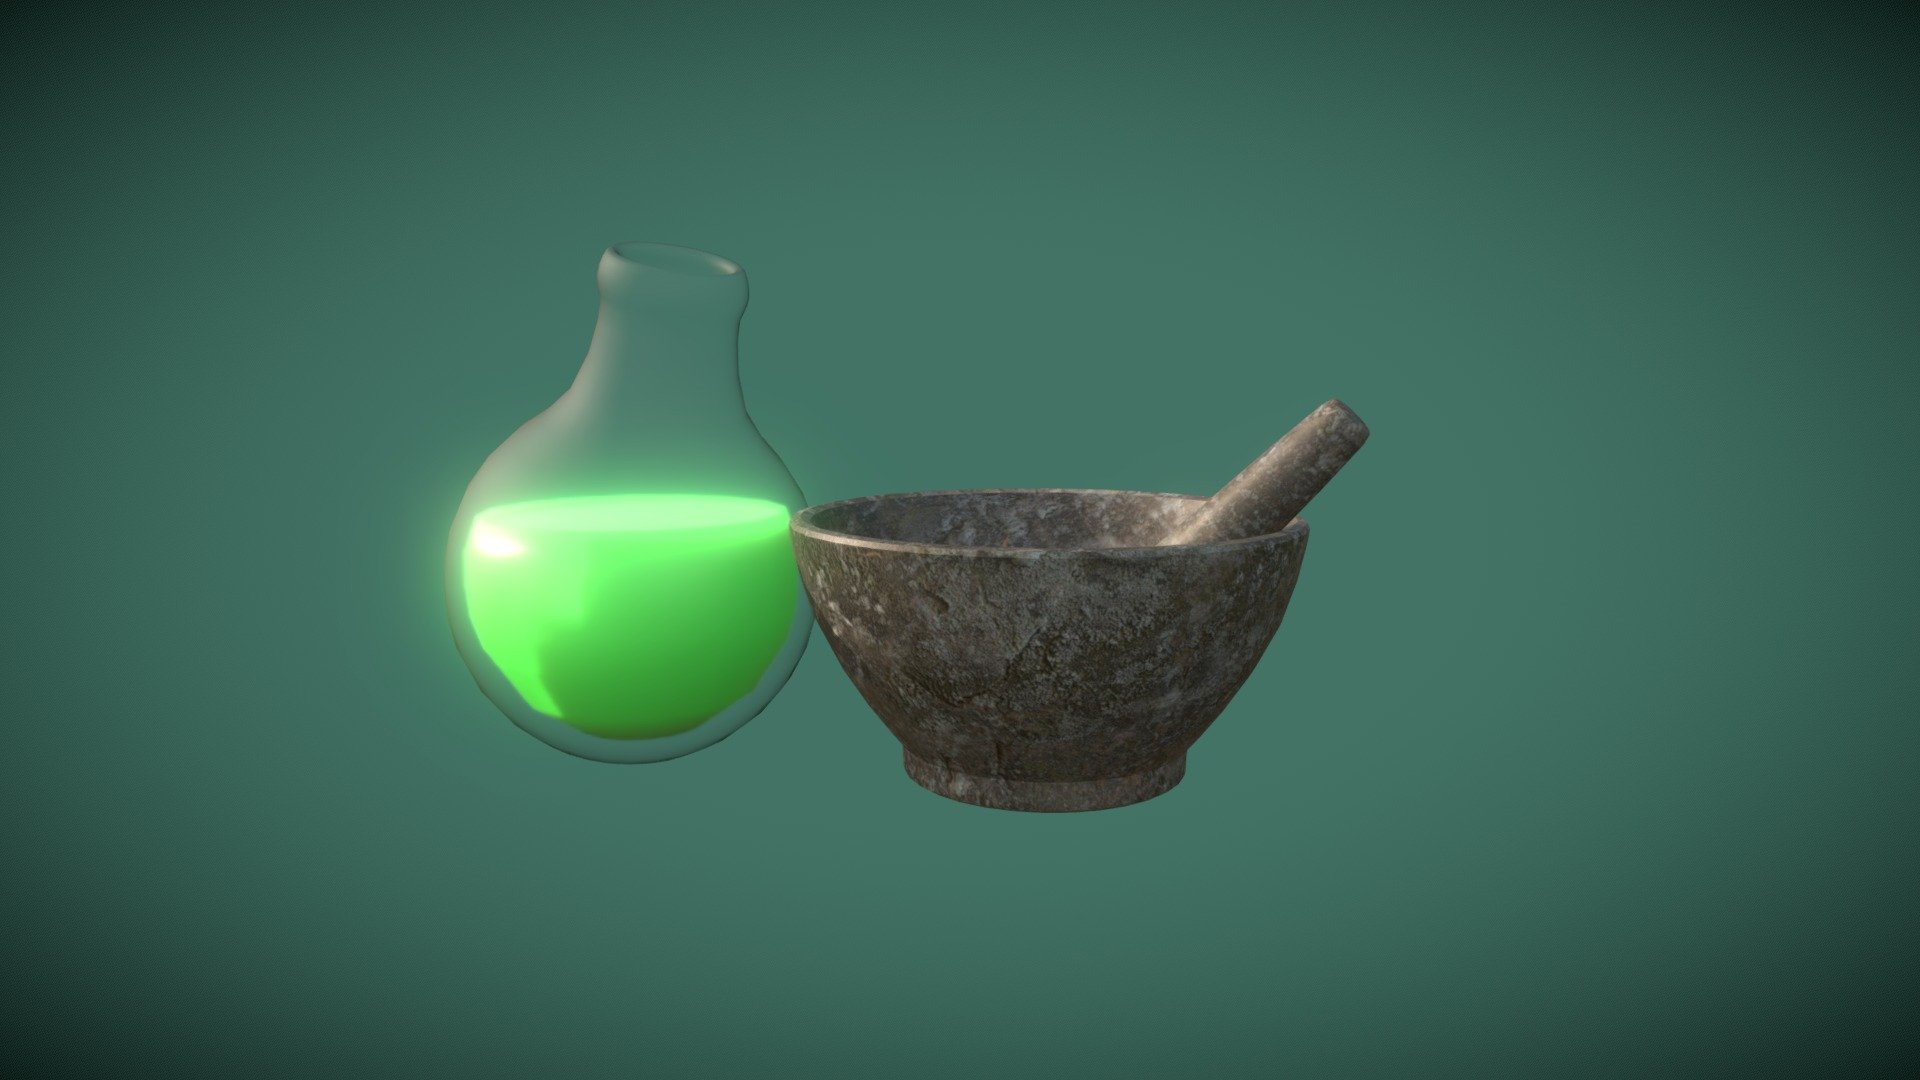 A combination of a grinding bowl for herbs etc. and the brewed potion. 

Some say this potion gives you the power to overthrow kings. Others say this potion is used to inflict terrible disease. But for me it is an expired energy drink.

Done for week 1 of the sketchfab weekly challange 3d model